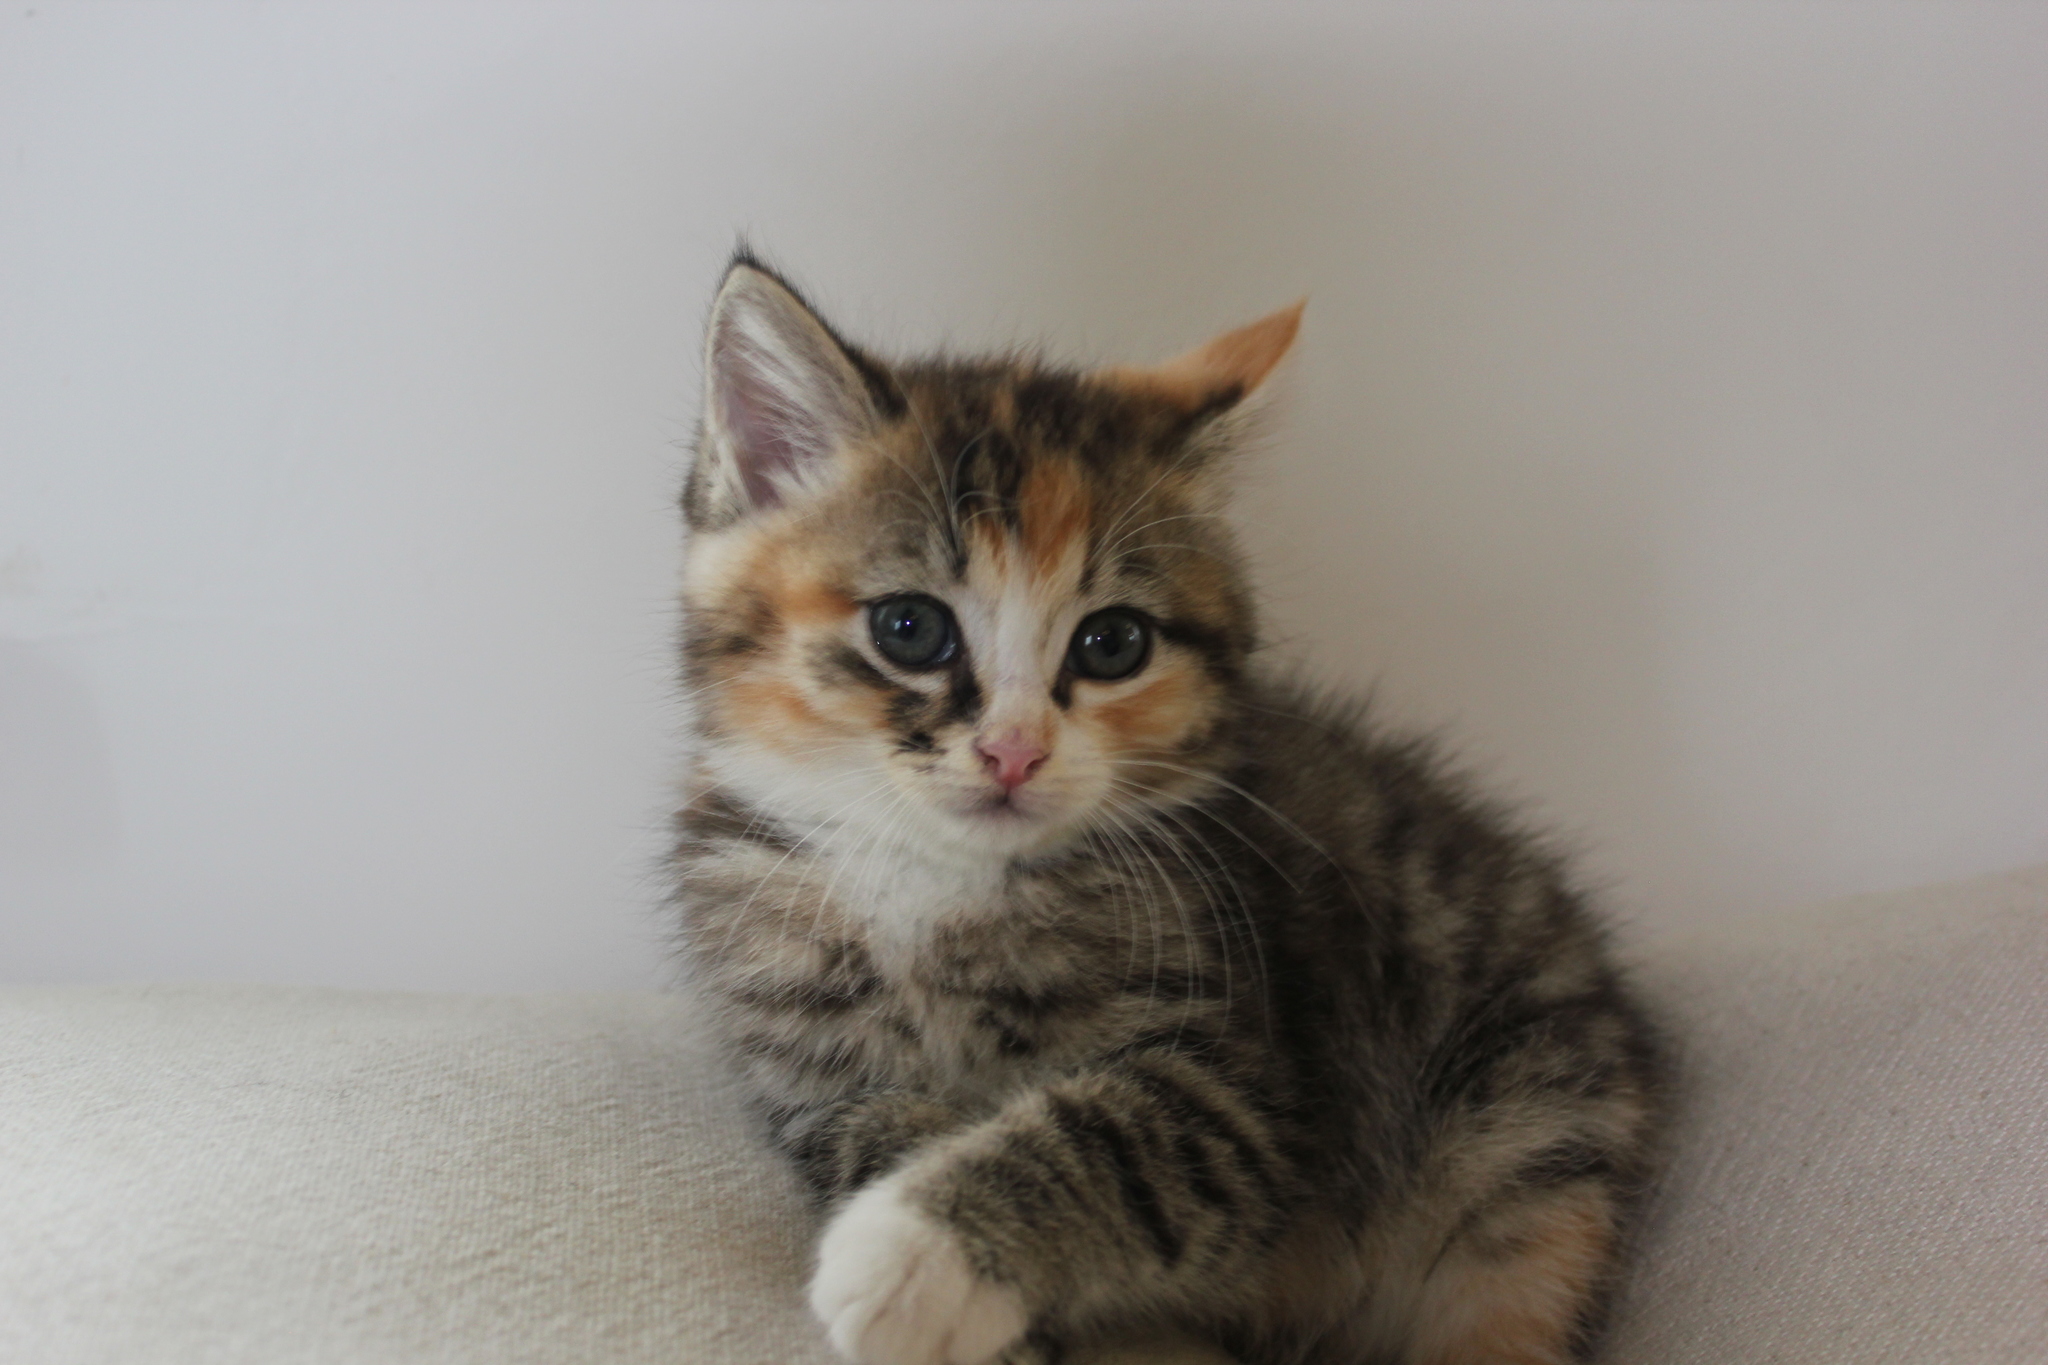 Kittens to a new home - My, Kittens, In good hands, Novosibirsk region, cat, Longpost, No rating